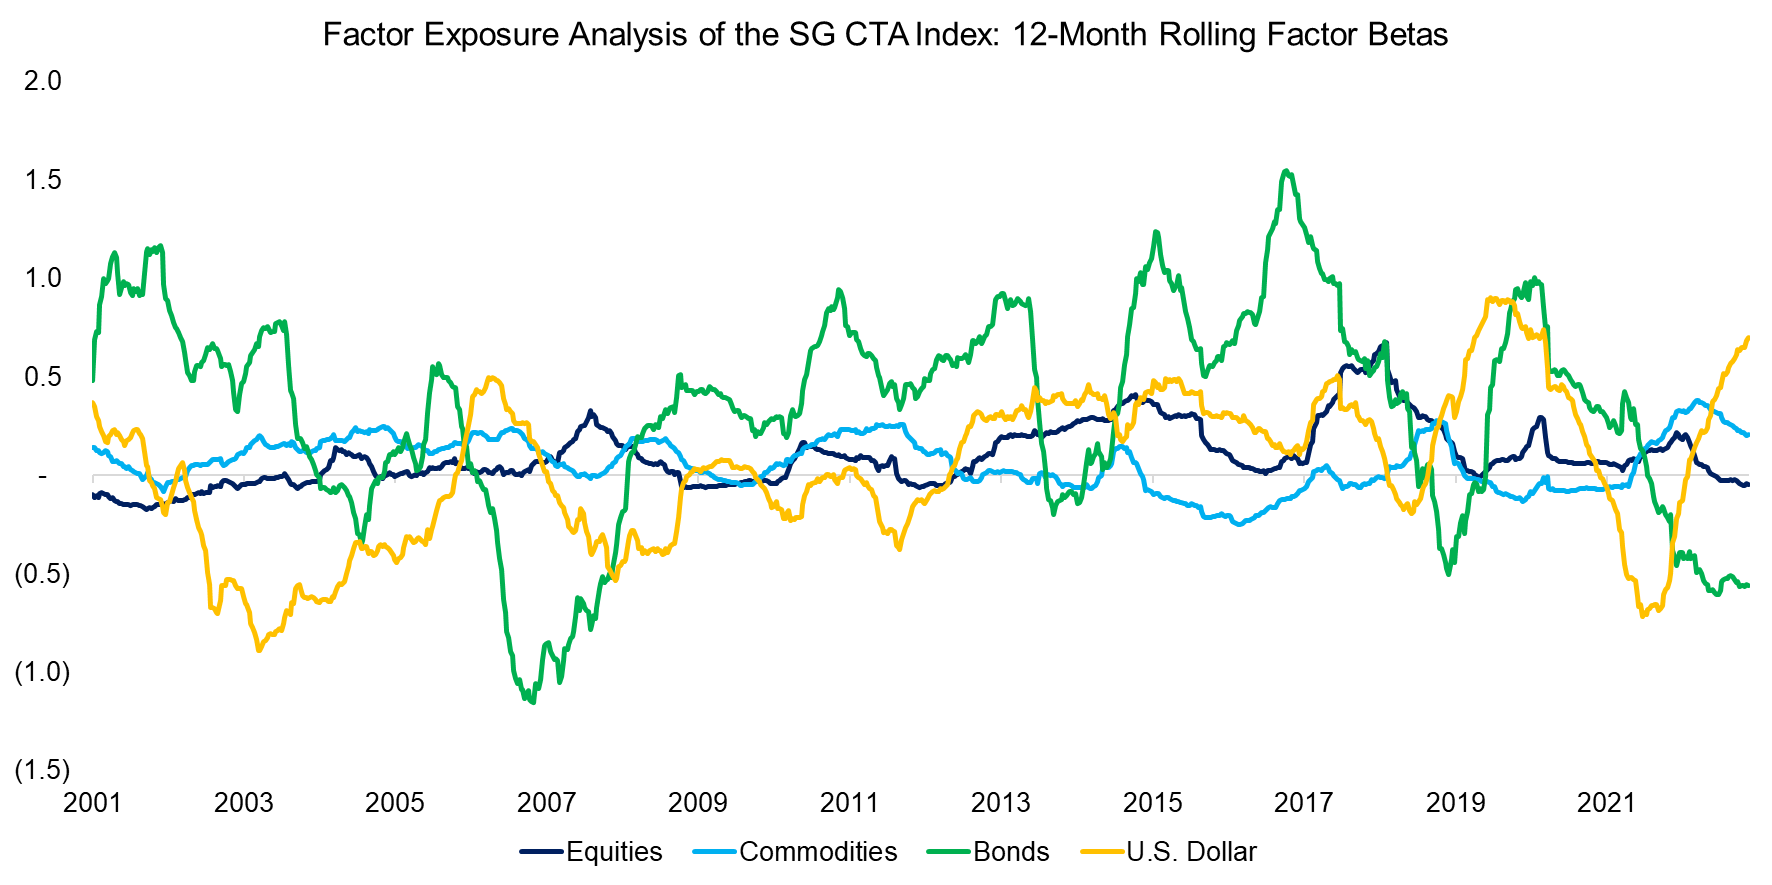 Factor Exposure Analysis of the SG CTA Index 12-Month Rolling Factor Betas